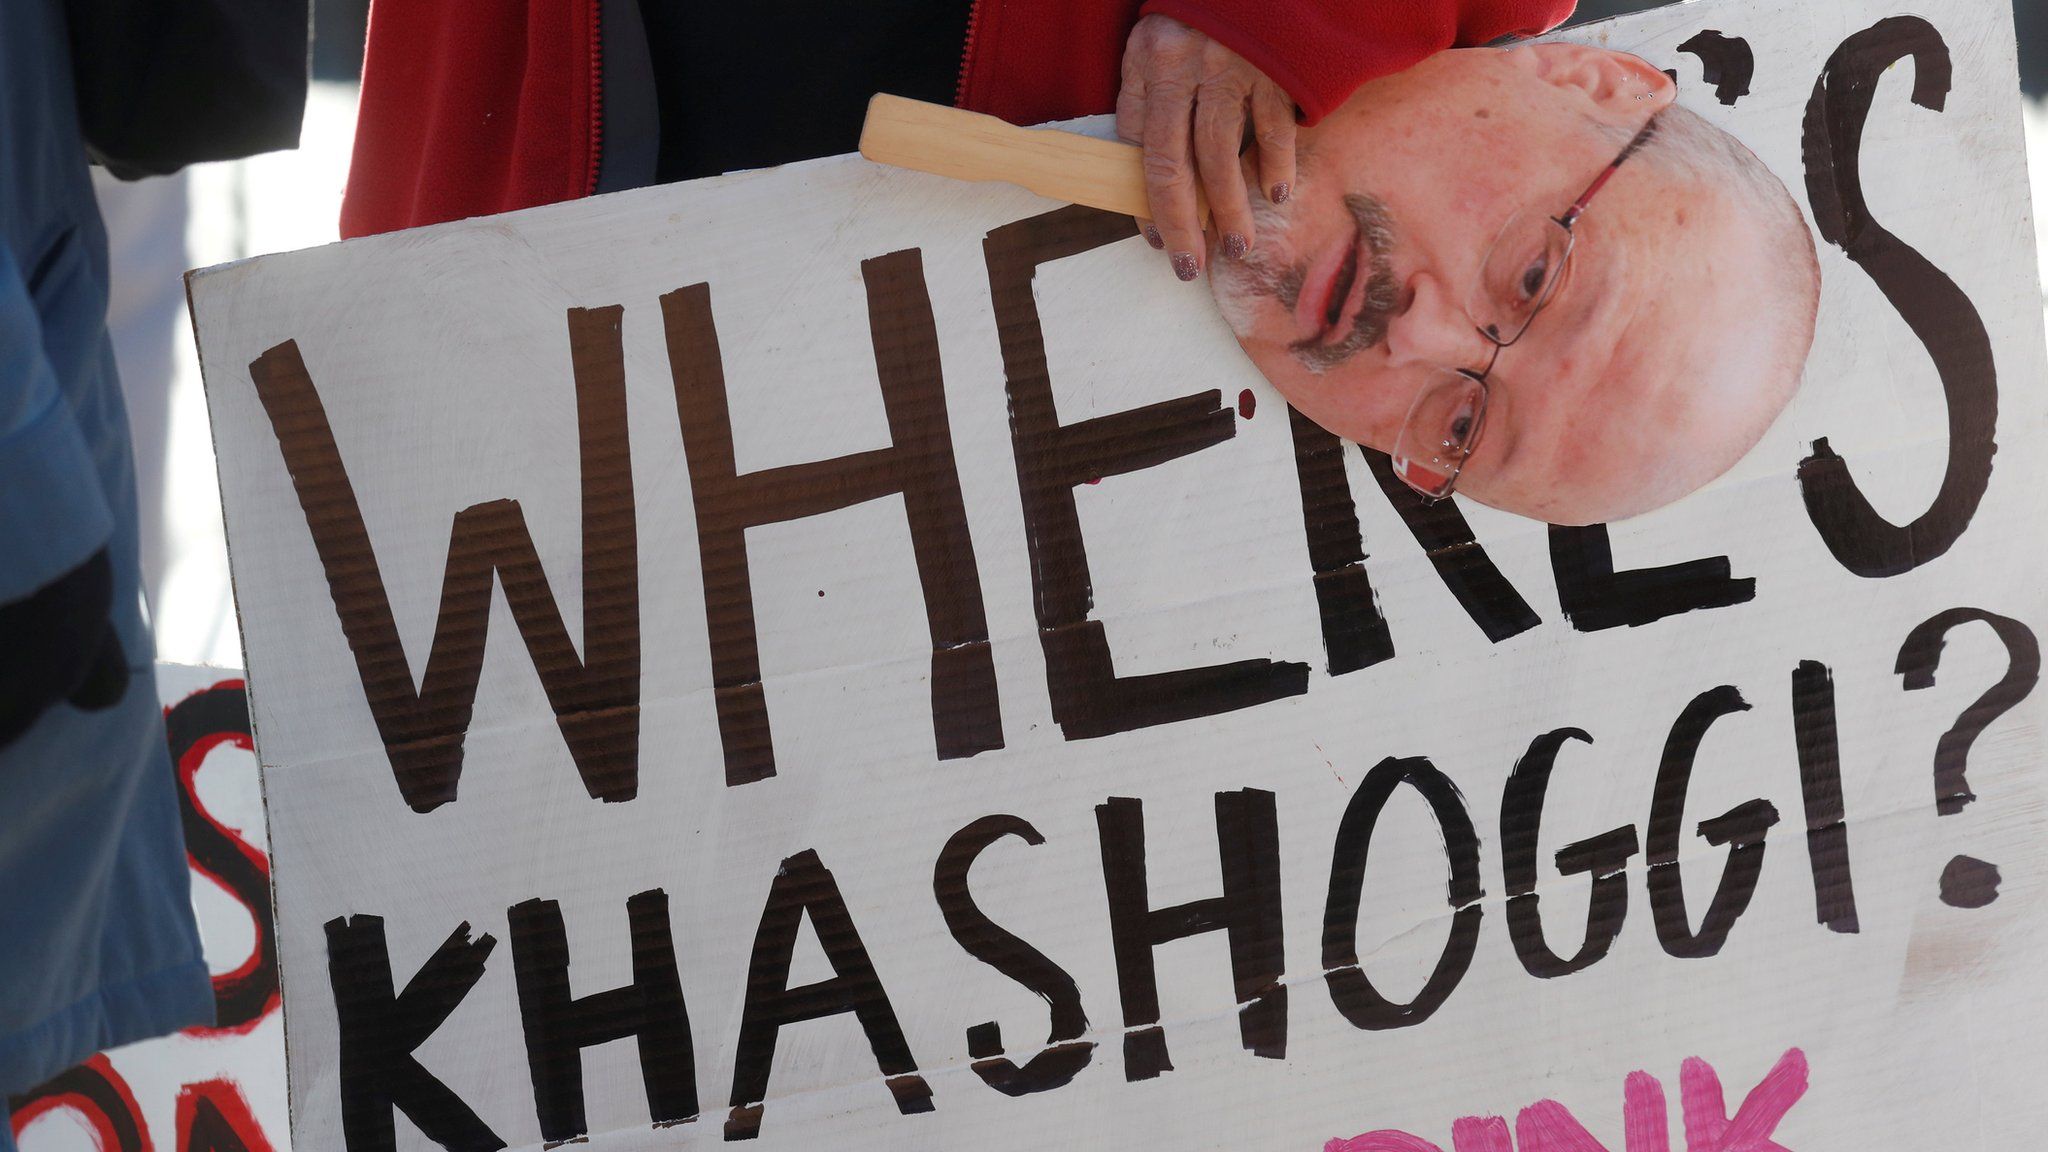 An activist holds a sign and image of missing Saudi journalist Jamal Khashoggi during a demonstration outside the White House in Washington, October 19, 2018